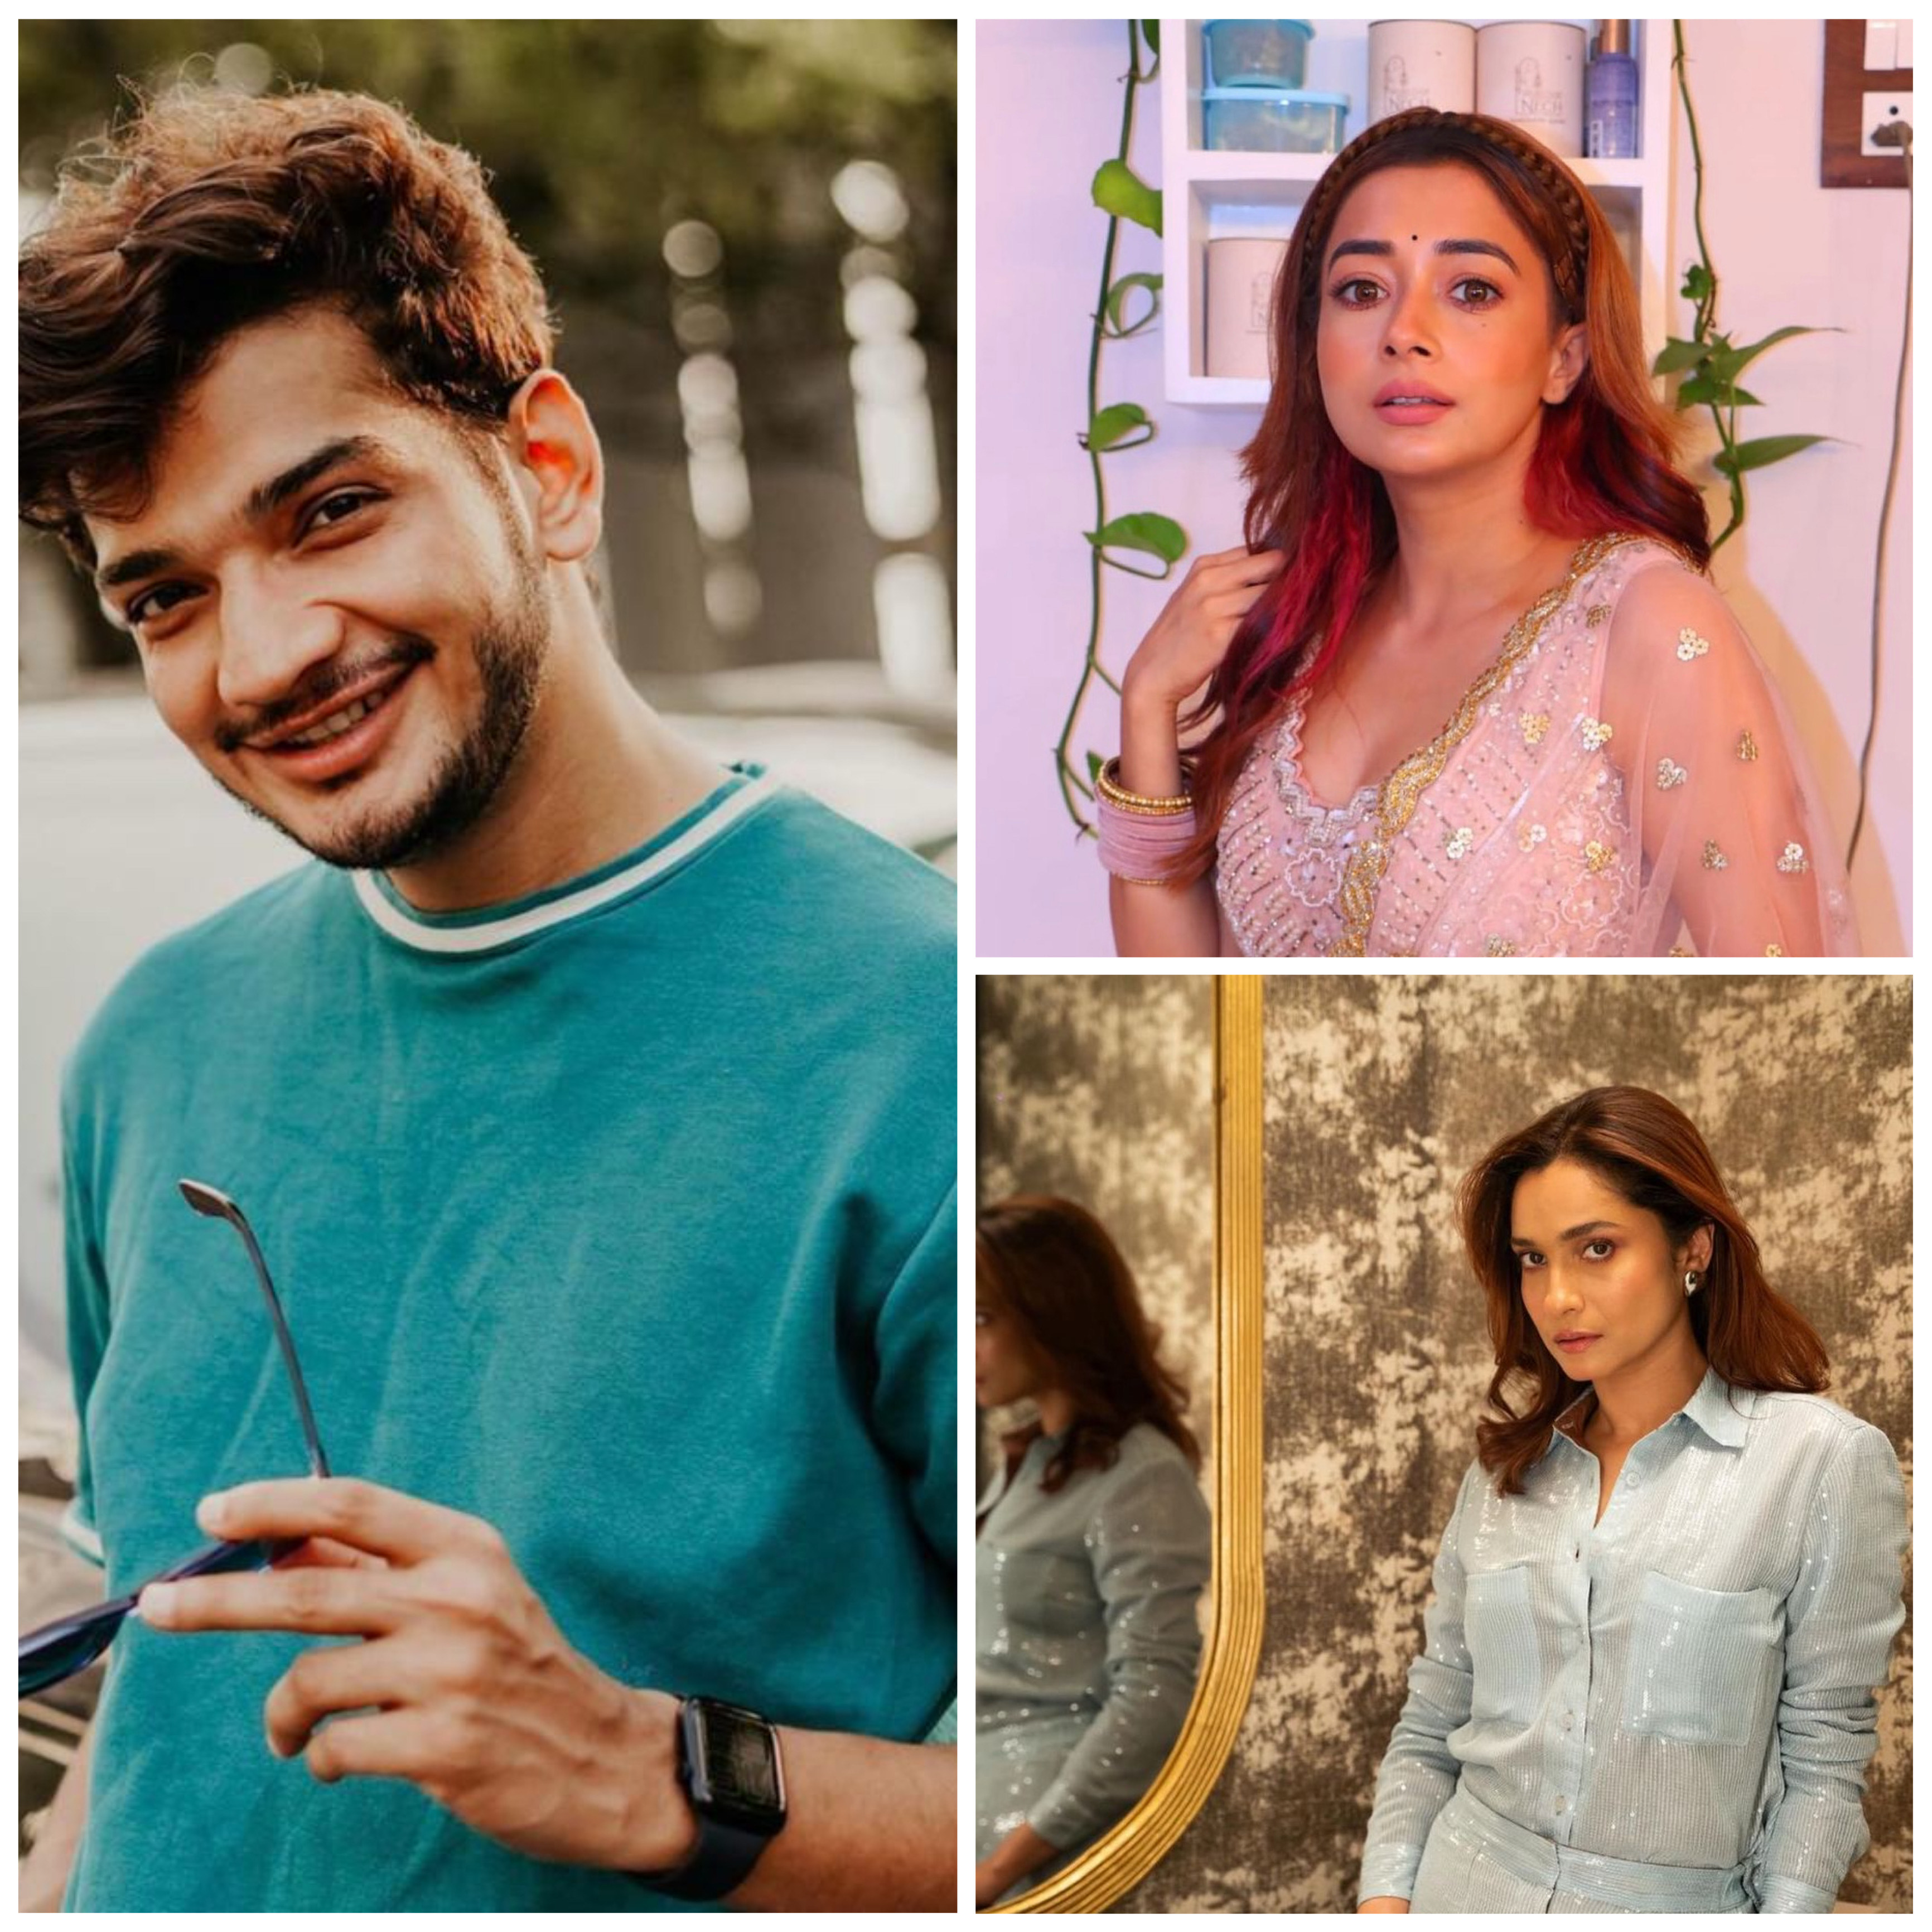 Tina Datta indirectly talks about channel whitewashing Ankita Lokhande’s image to make her win Bigg Boss; supports Munawar Faruqui and says, “I wish he wins the show”